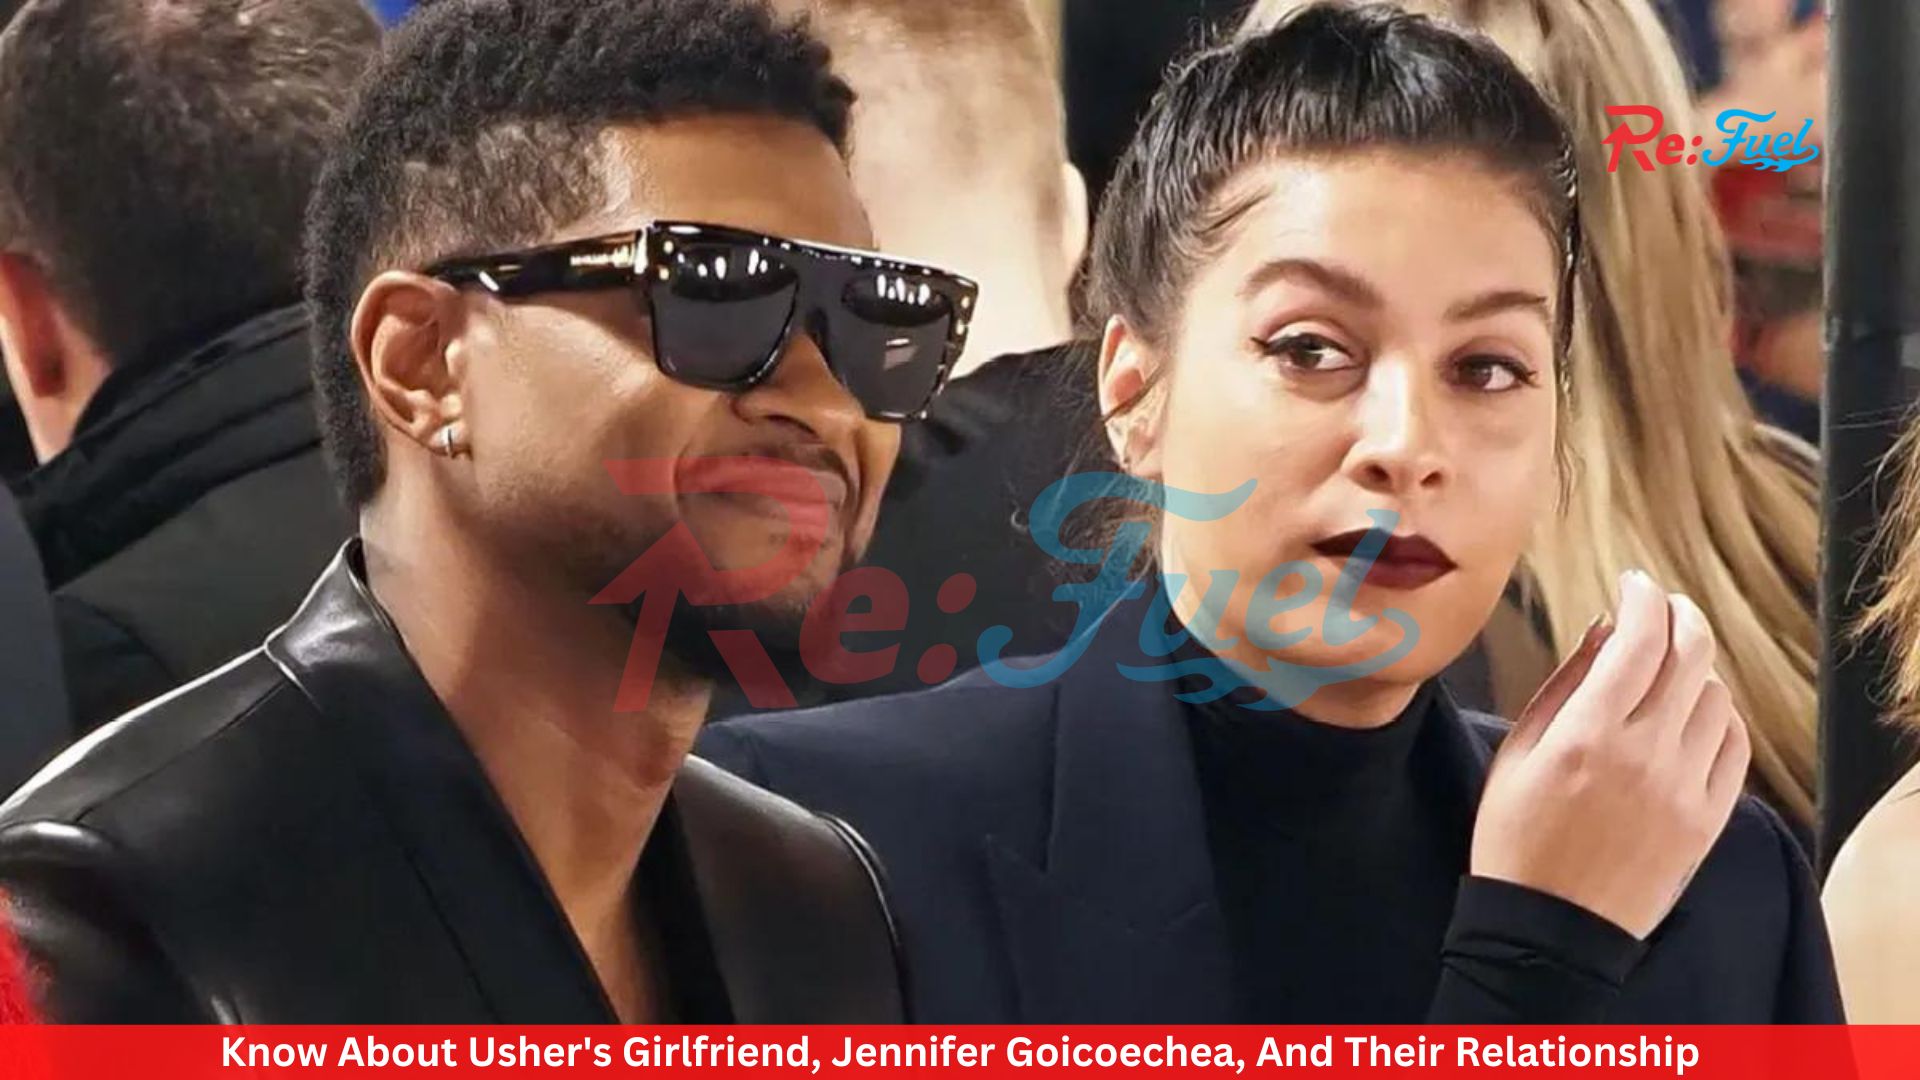 Know About Usher's Girlfriend, Jennifer Goicoechea, And Their Relationship